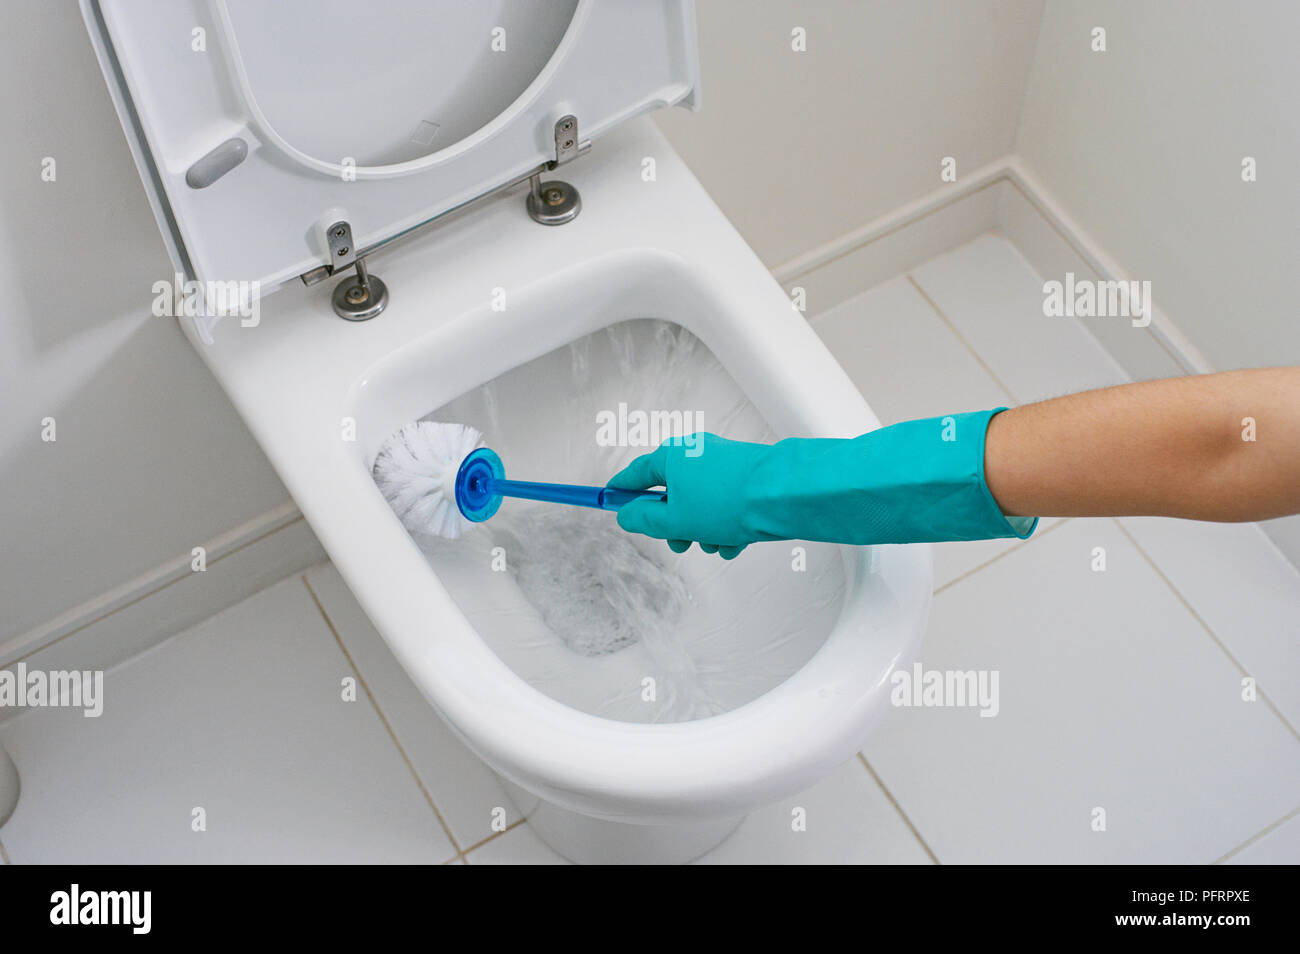 Woman wearing washing up gloves to clean toilet with brush and flushing water Stock Photo